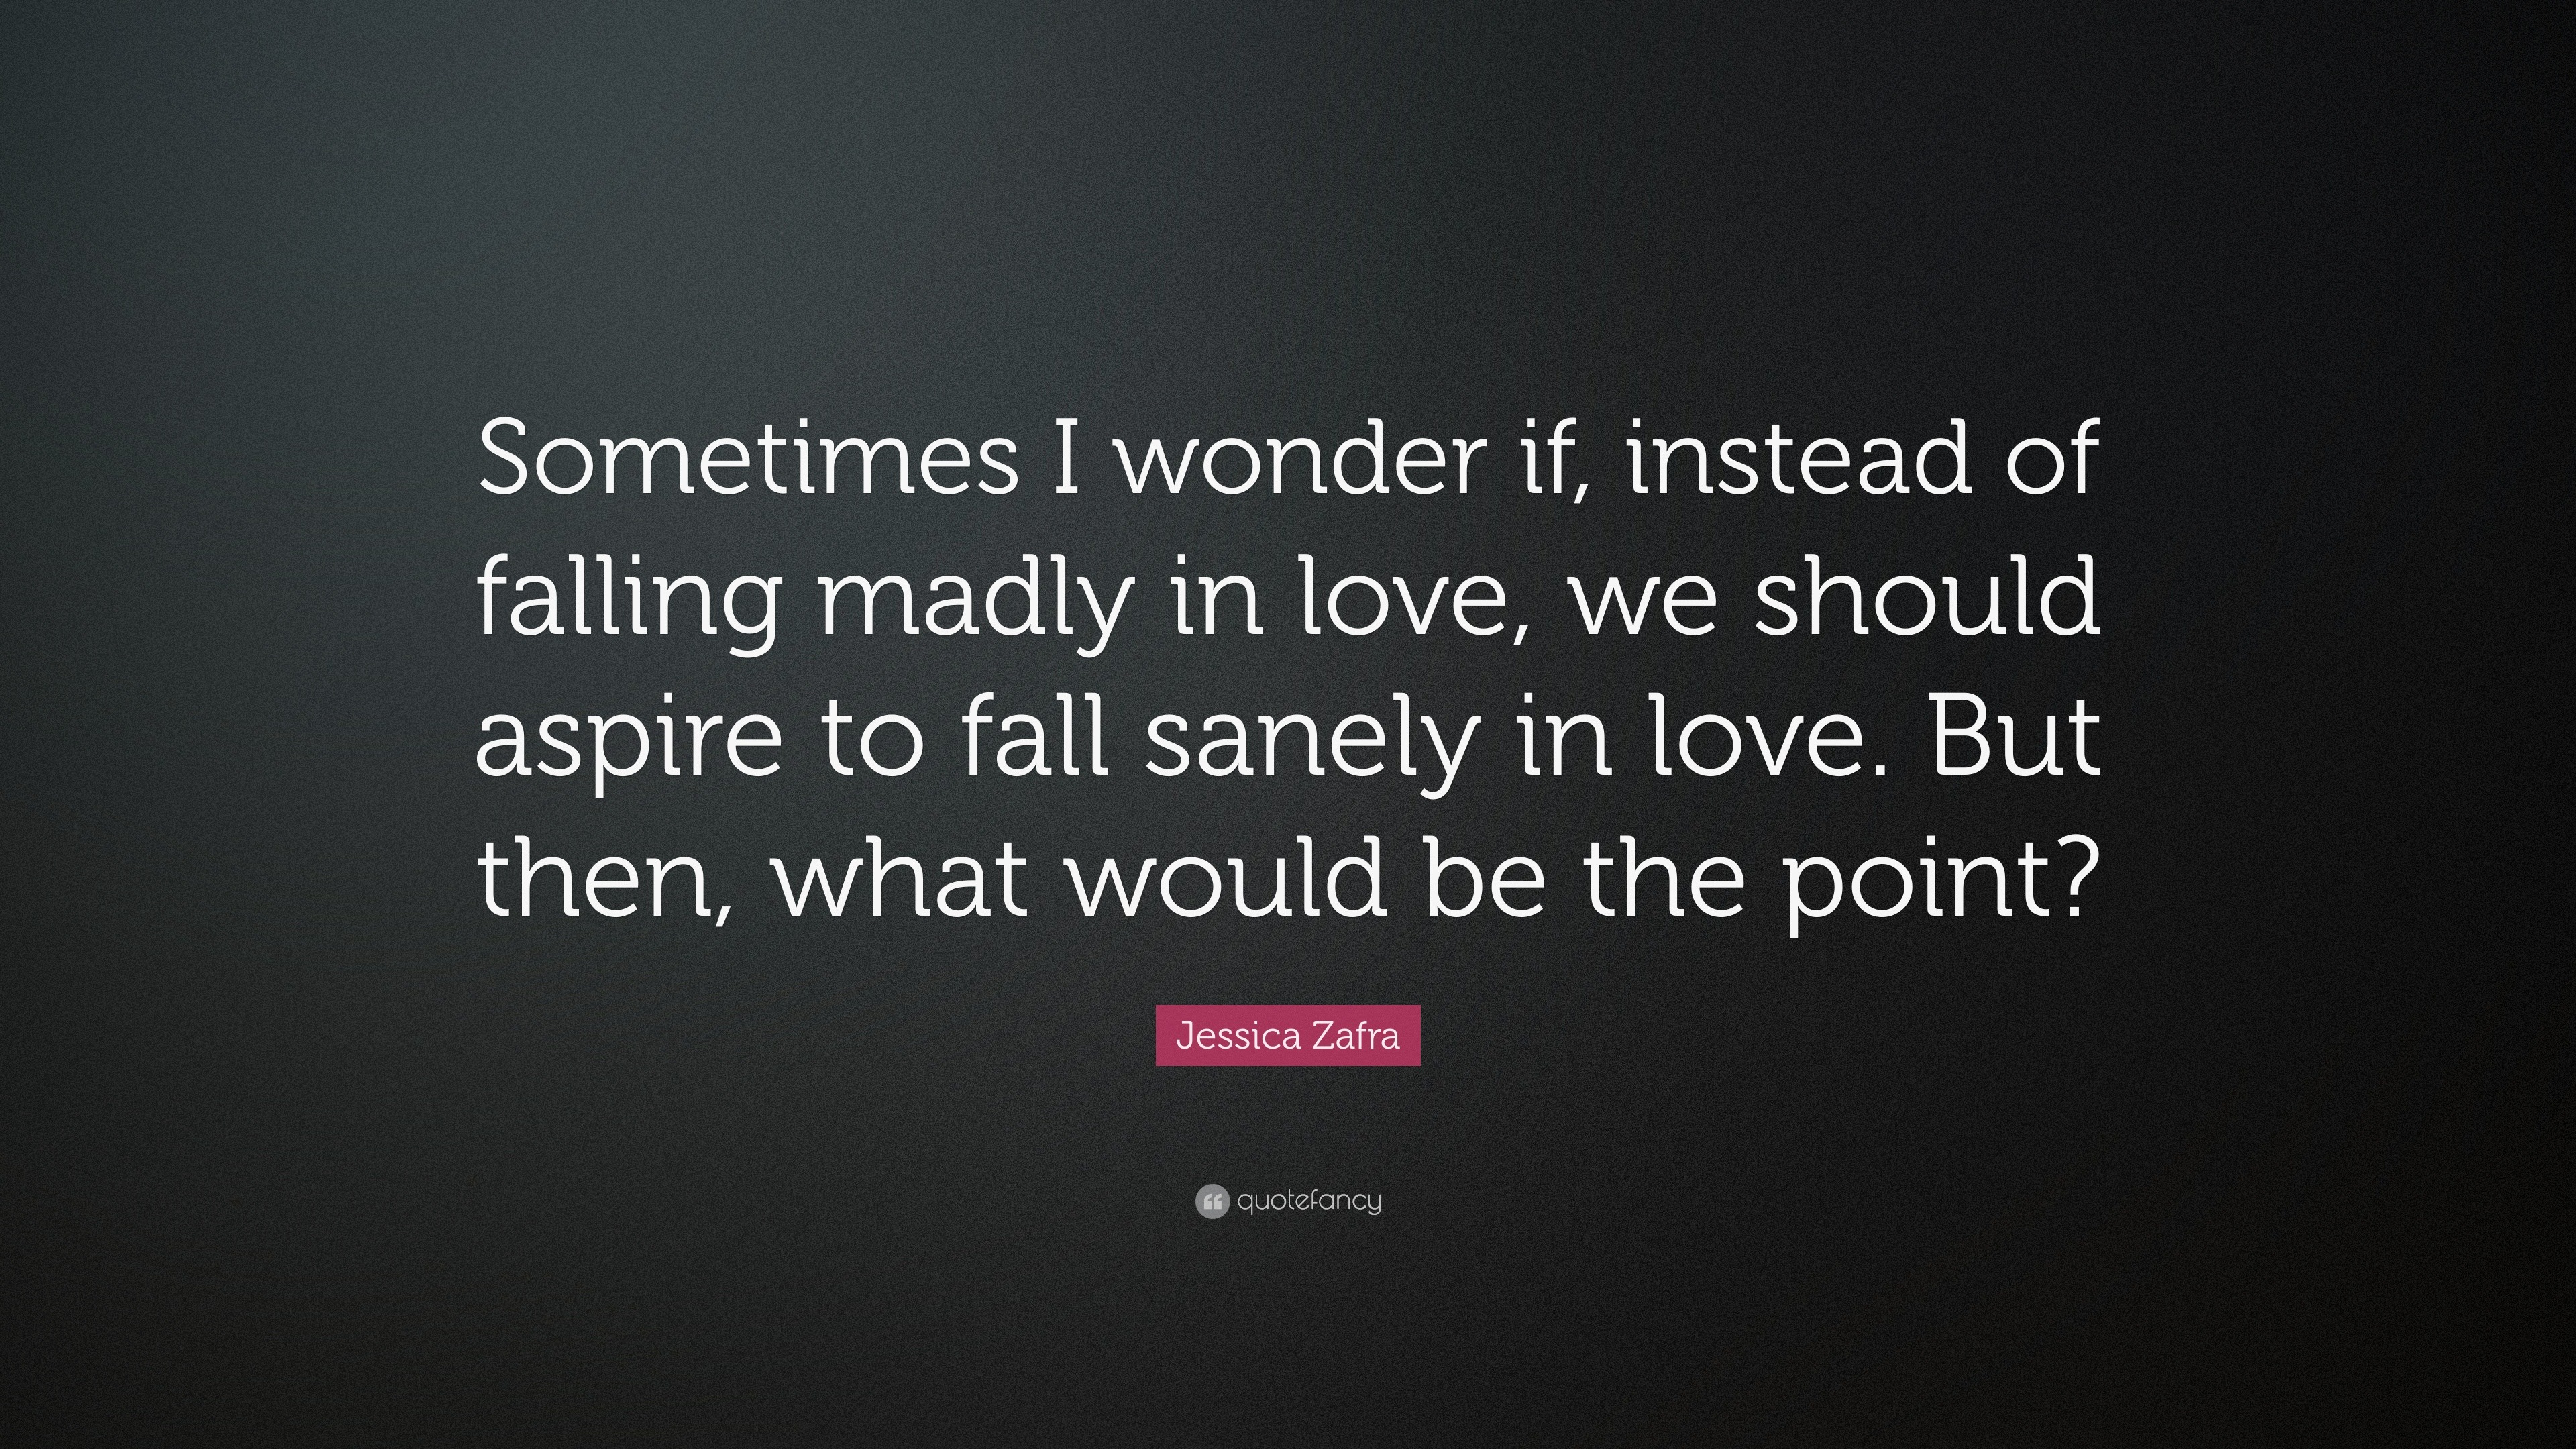 Jessica Zafra Quote “Sometimes I wonder if instead of falling madly in love